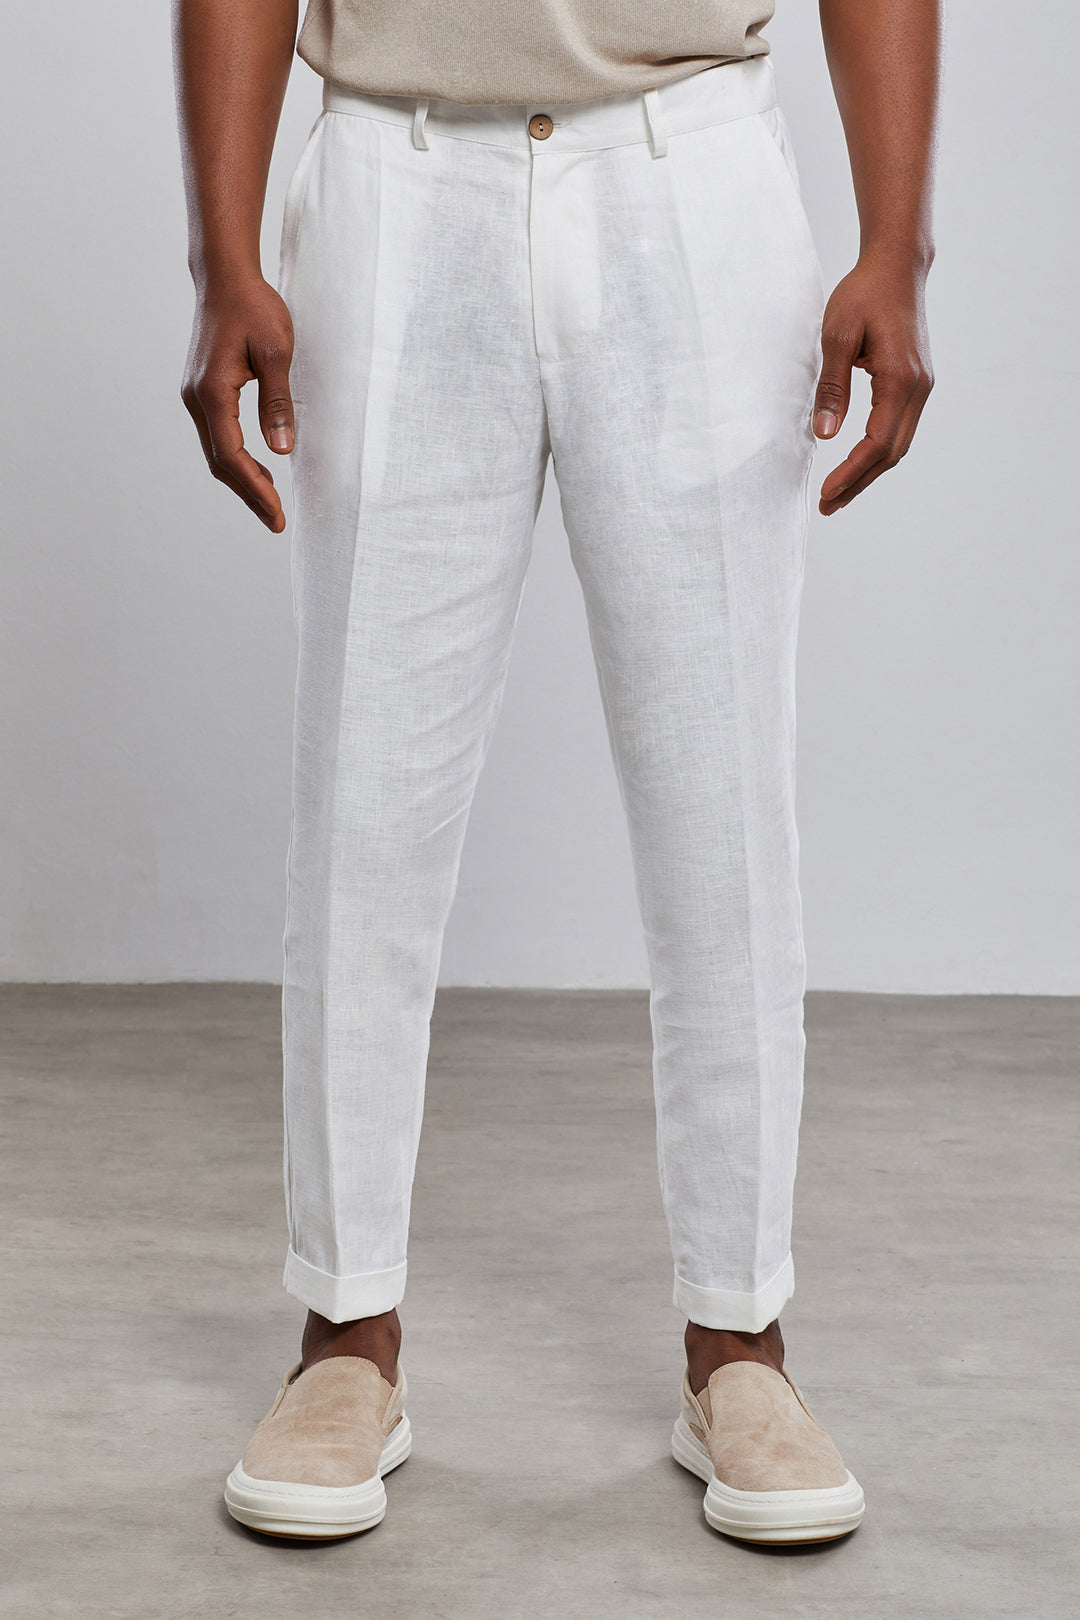 White Deluxe Carrot Fit Chino %100 Linen Pants